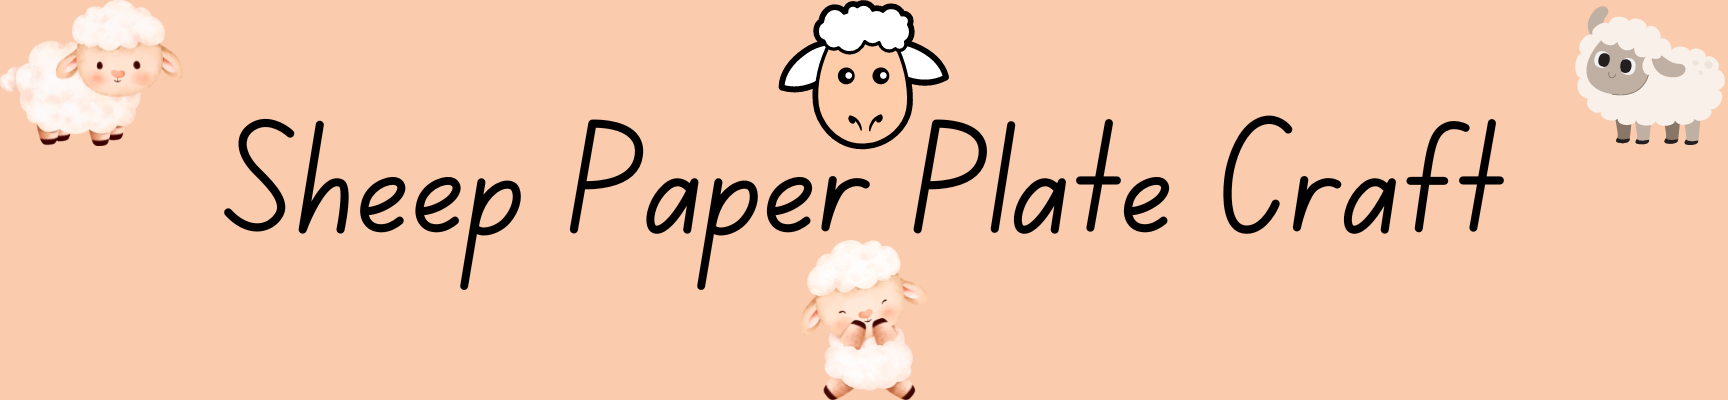 How to Create a Sheep Paper Plate Craft